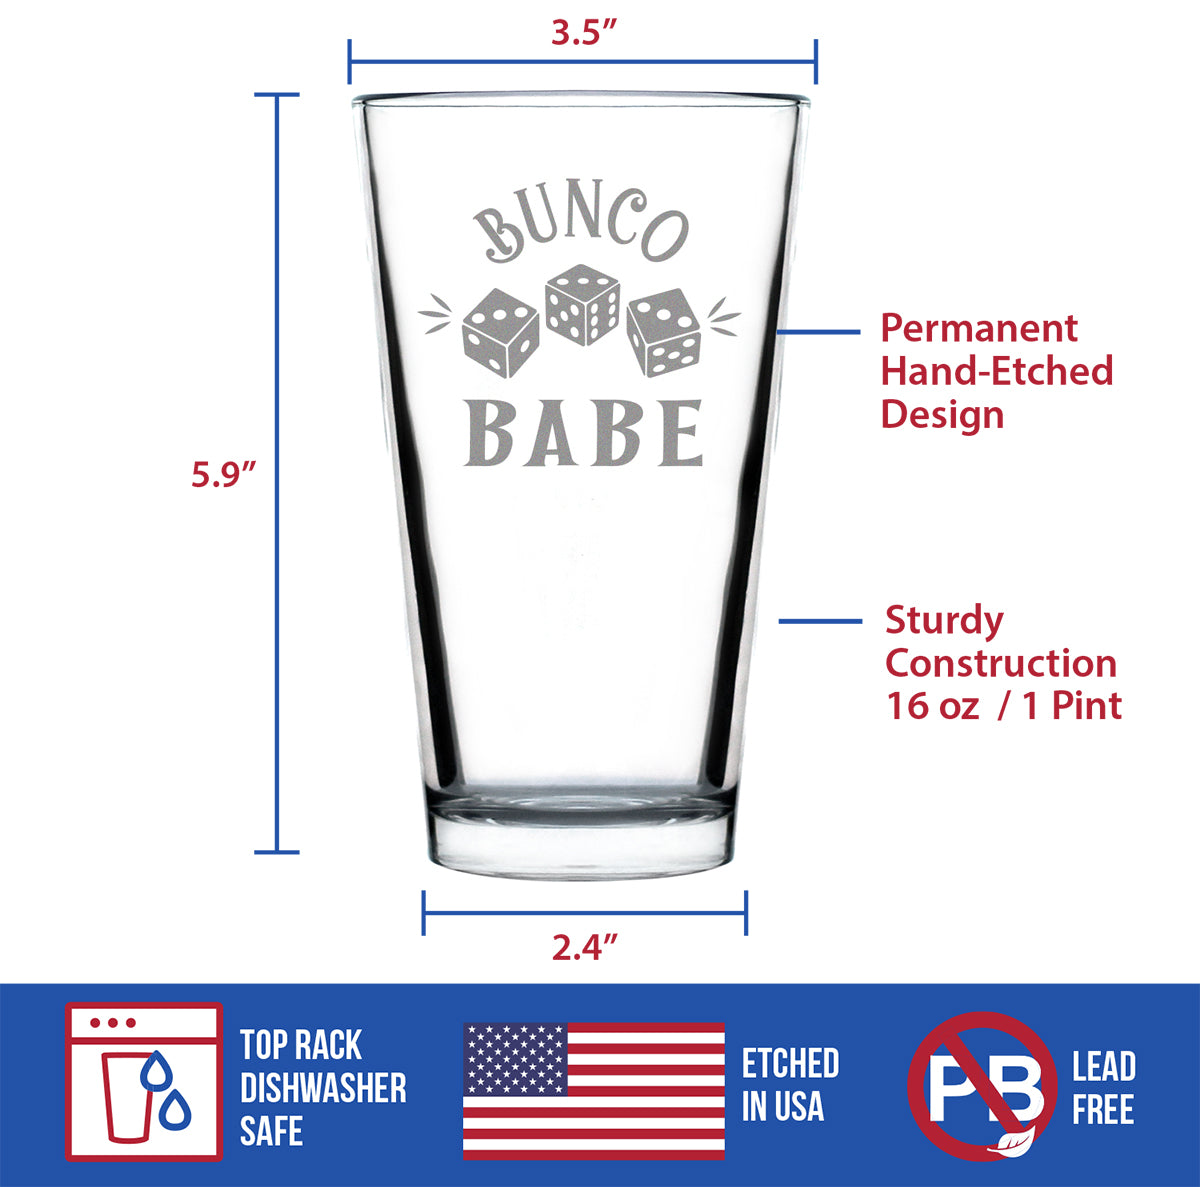 Bunco Babe Pint Glass for Beer - Bunco Decor and Bunco Gifts for Women - 16 Oz Glasses